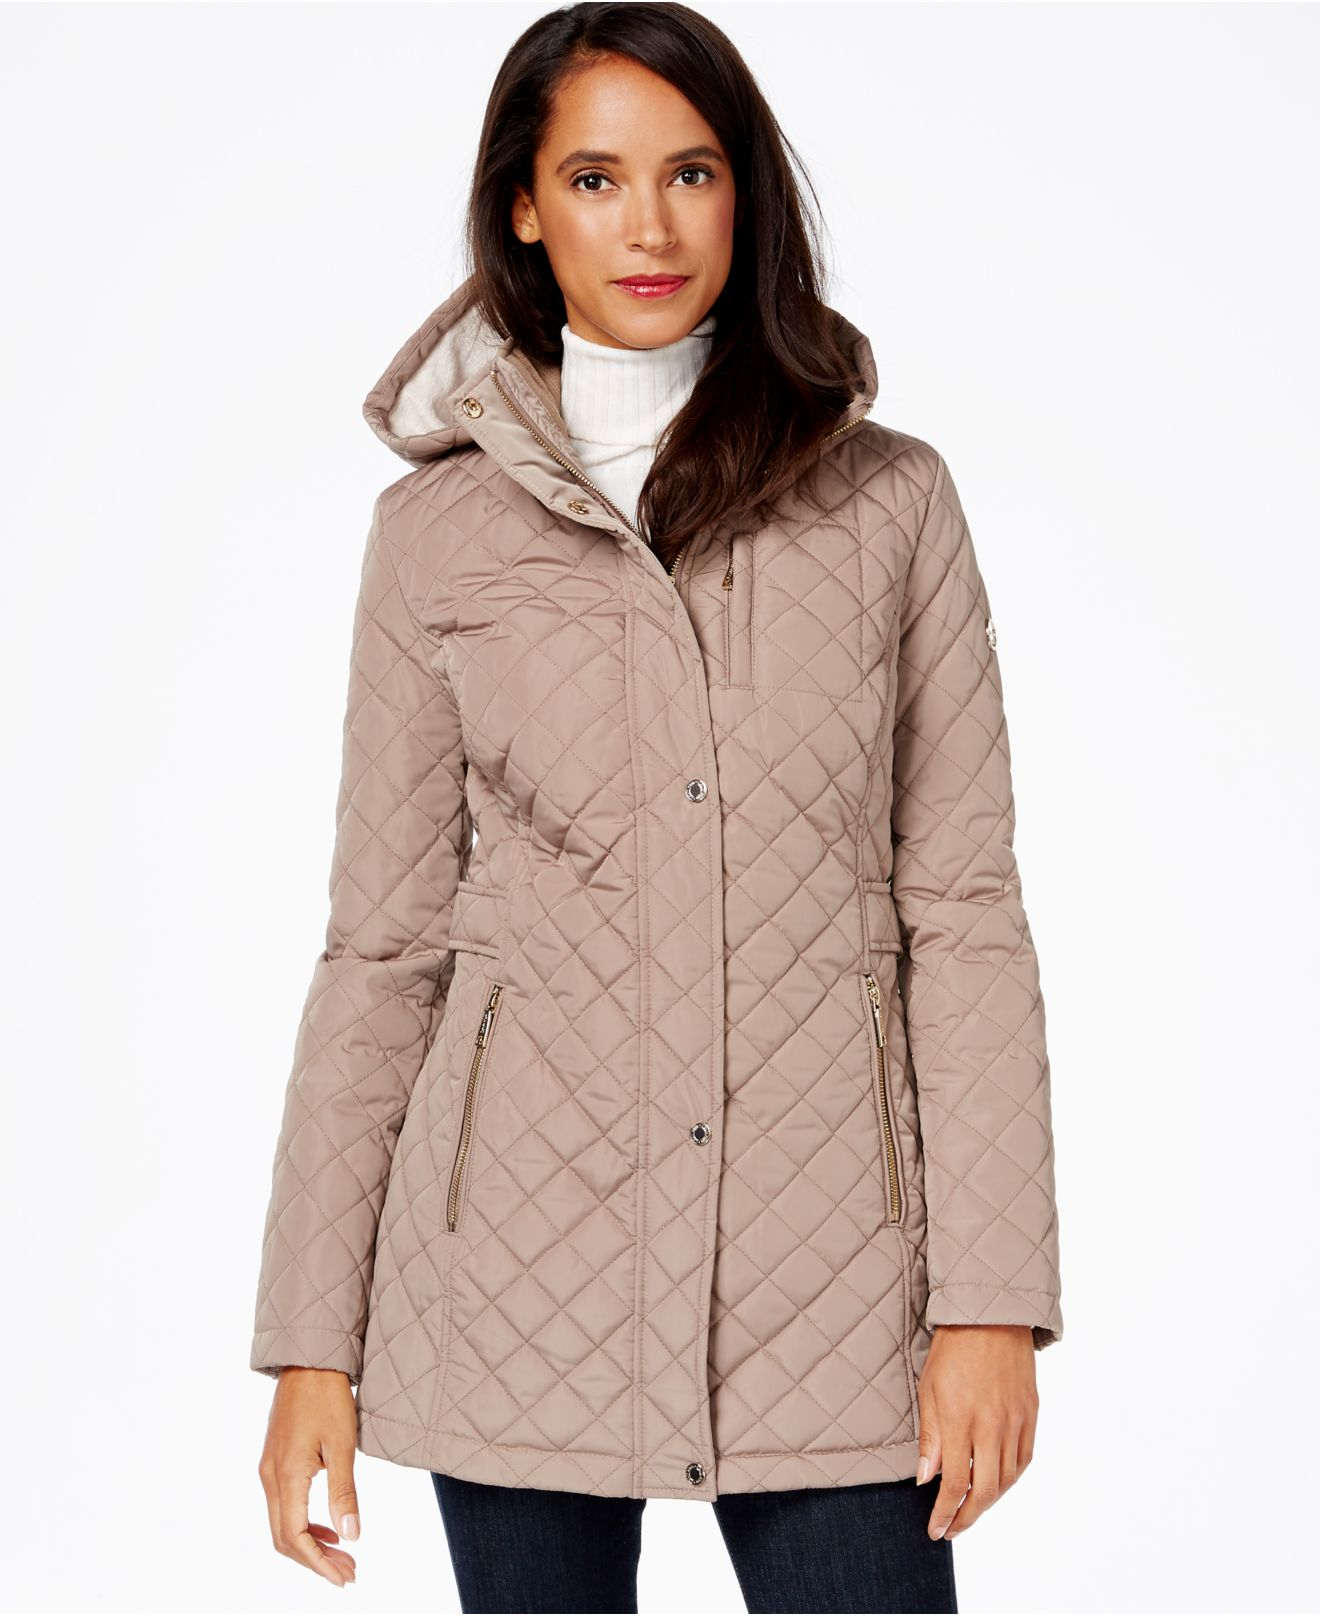 Calvin Klein Hooded Quilted Jacket in Gray - Lyst